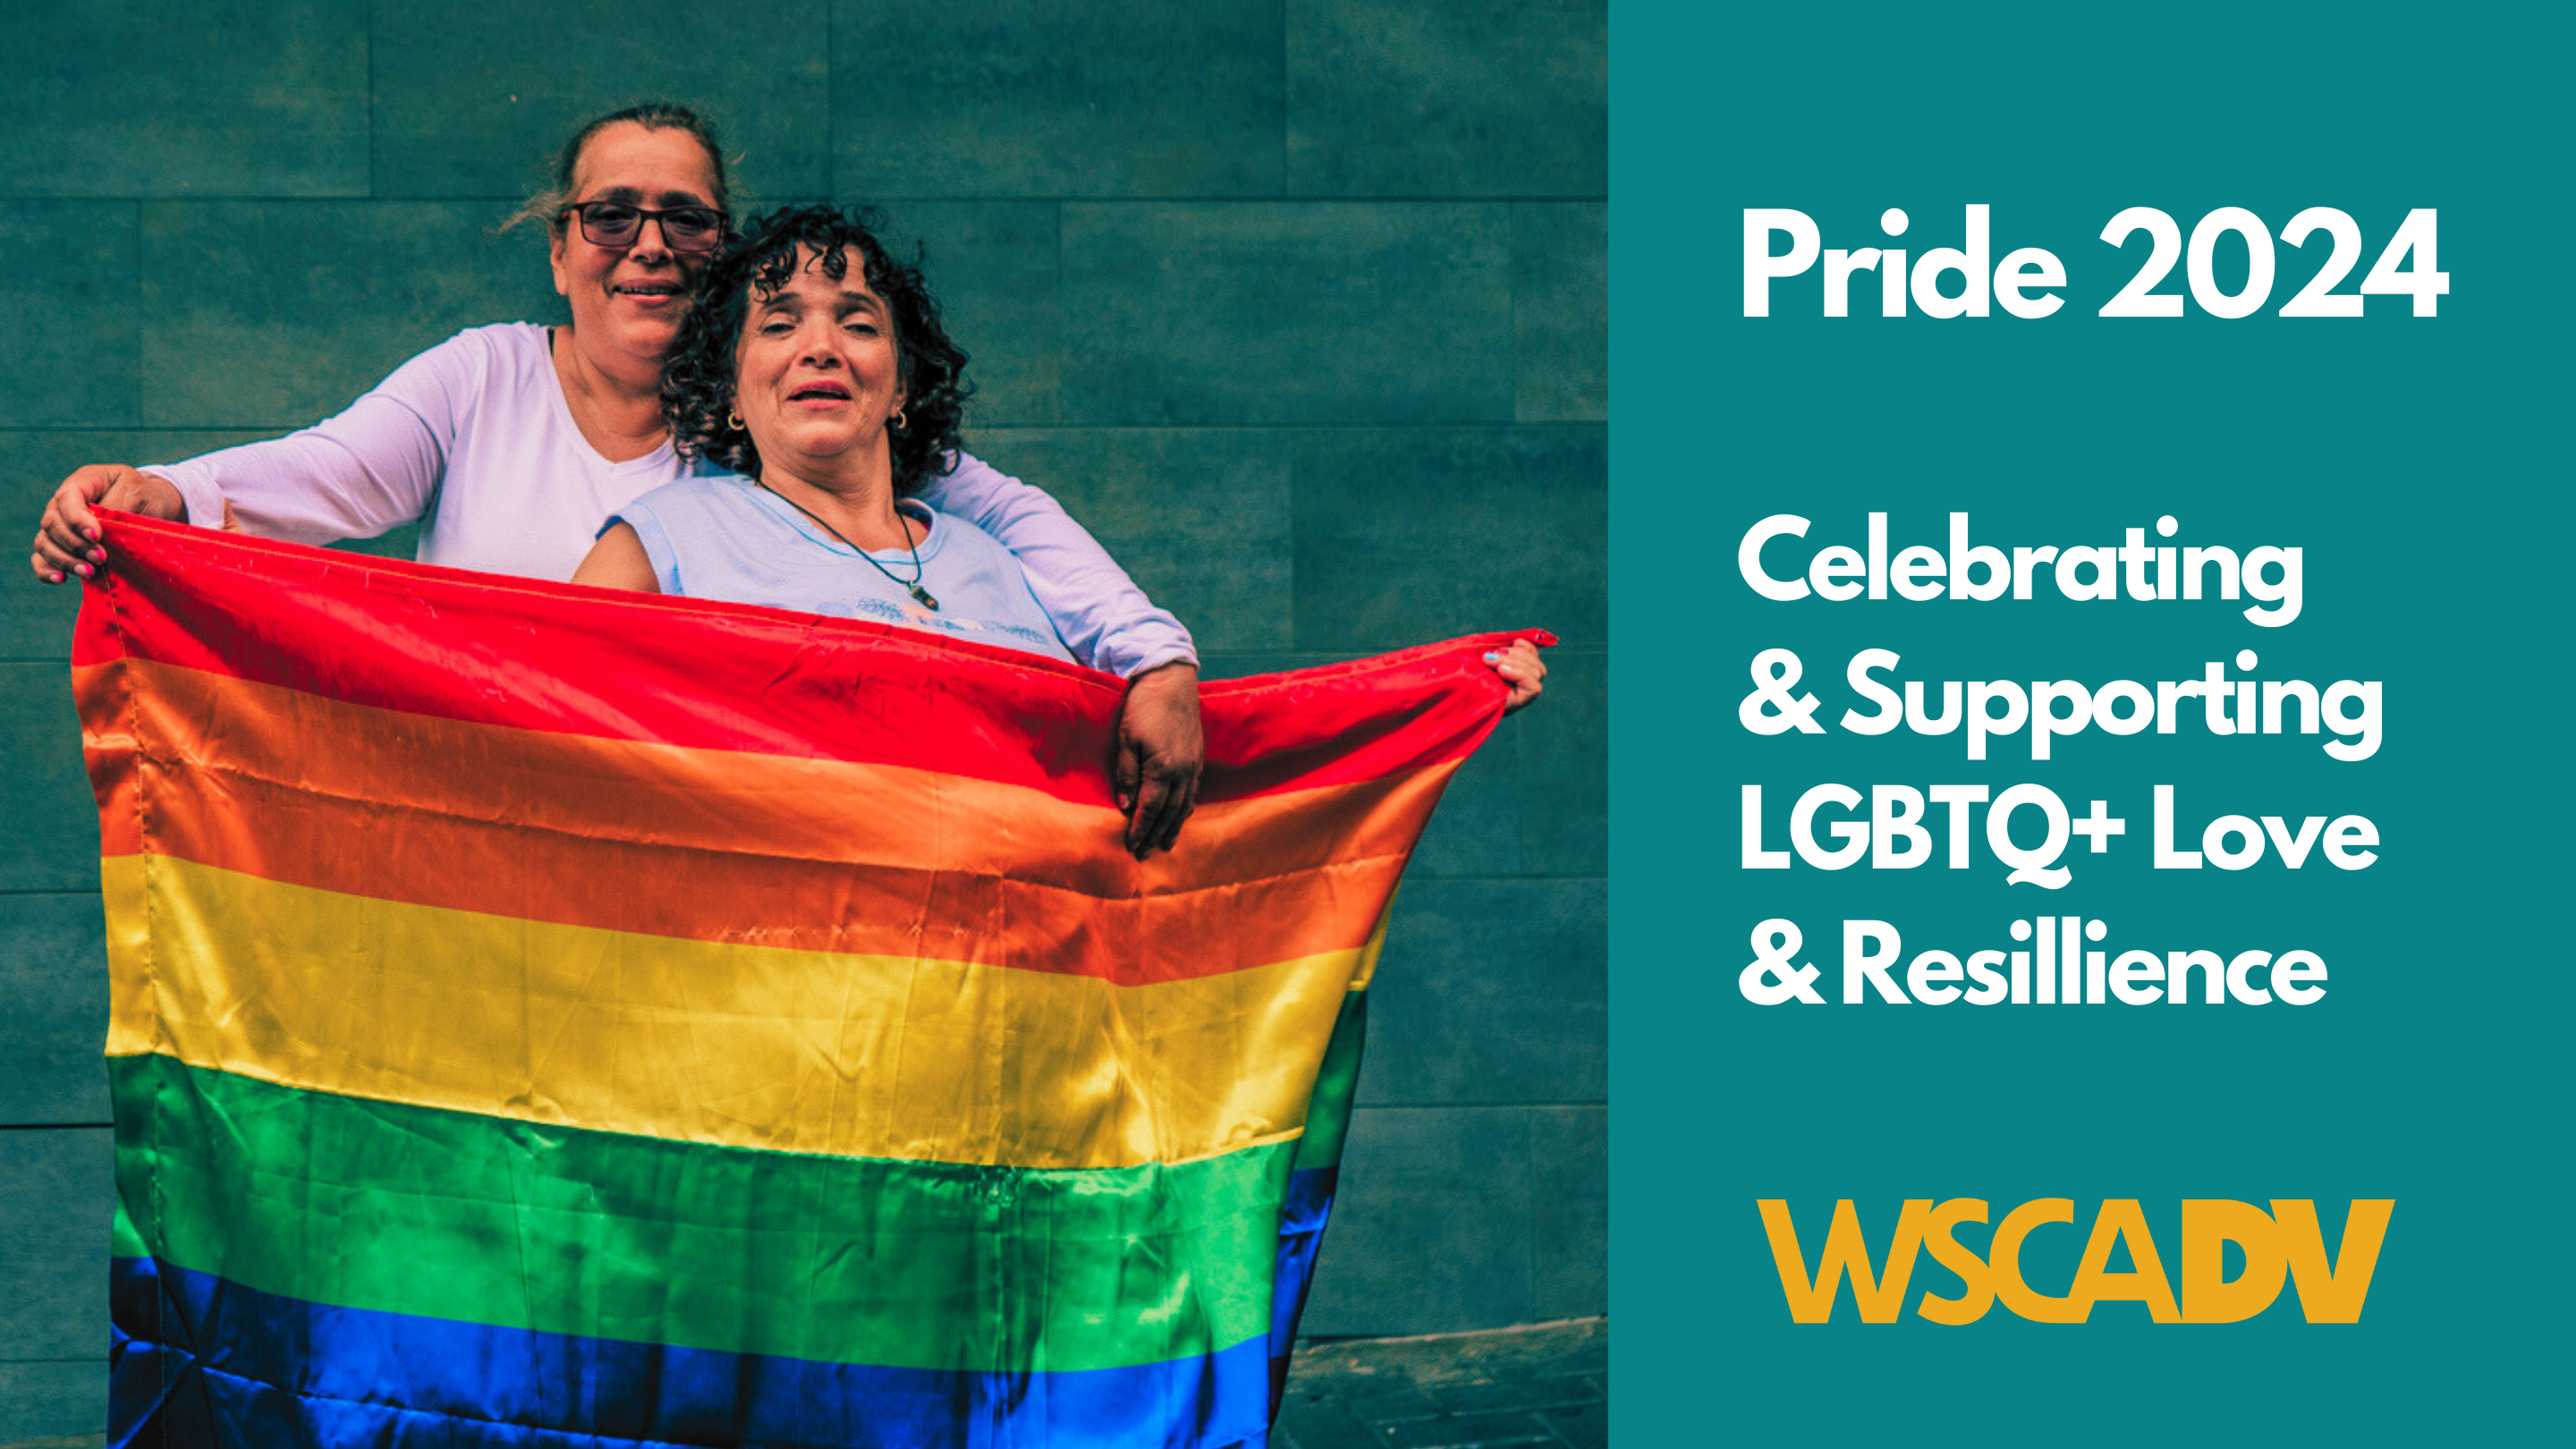 Pride 2024: Celebrating & Supporting LGBTQ+ Love & Resilience